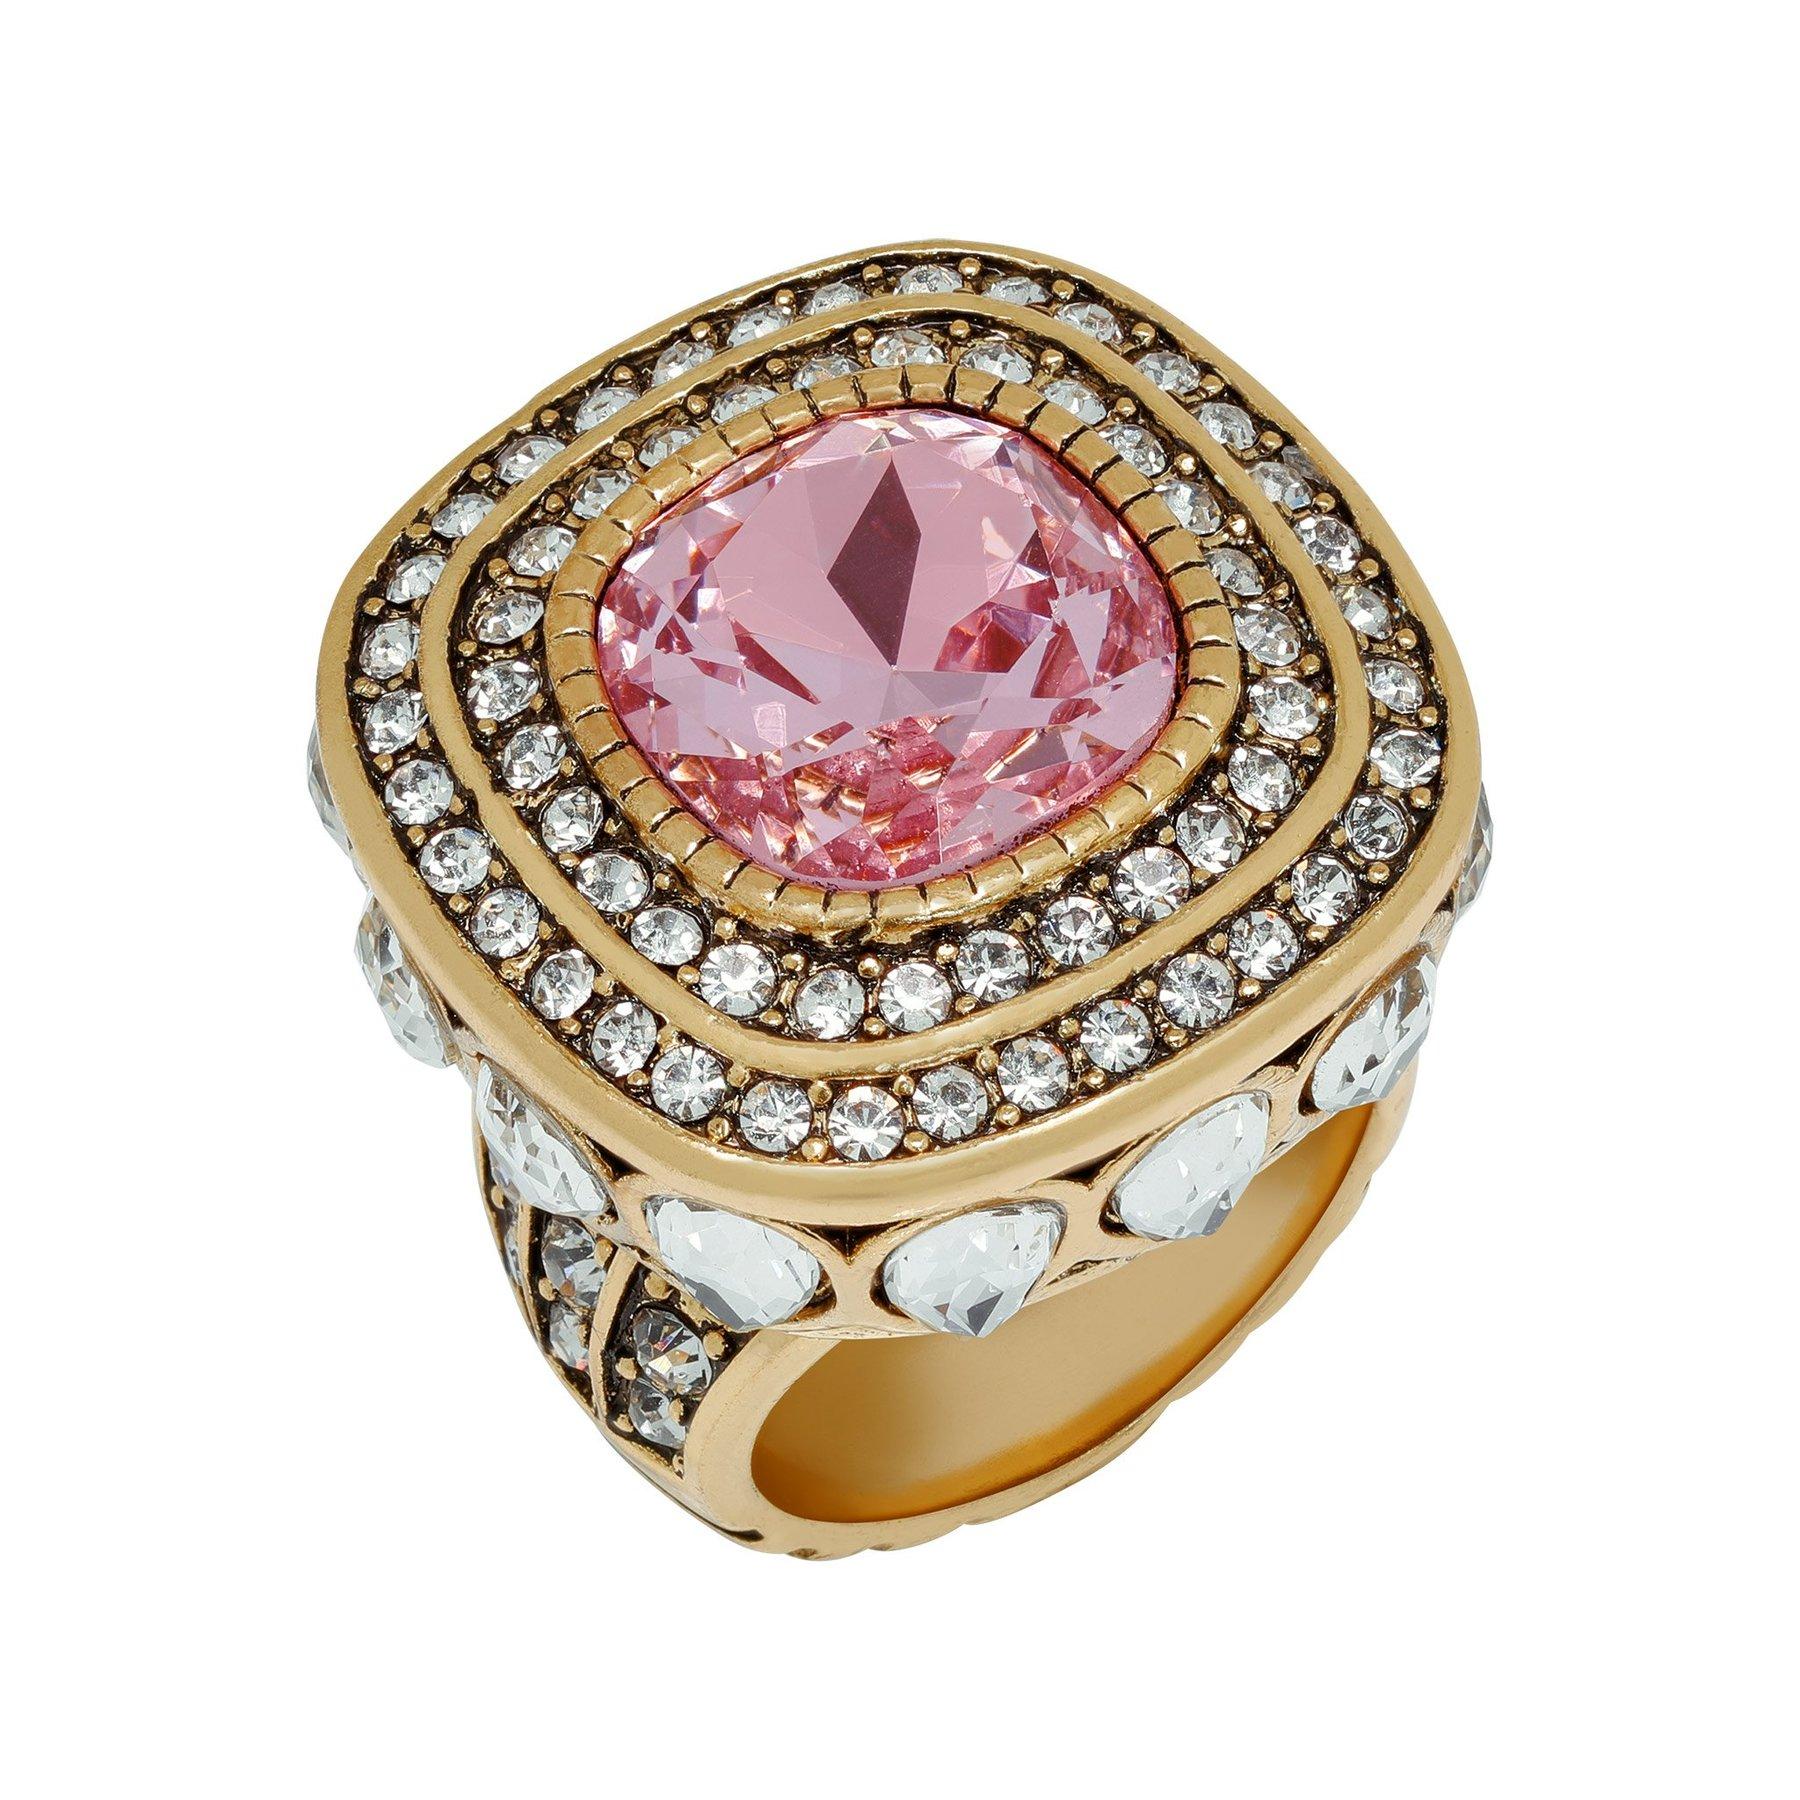 Heidi Daus Enchante Magnetic Ring Set of 3 Size 8 PINK VERSION

Inspired by the self expression & opulence of the art deco era, Heidi's best selling 